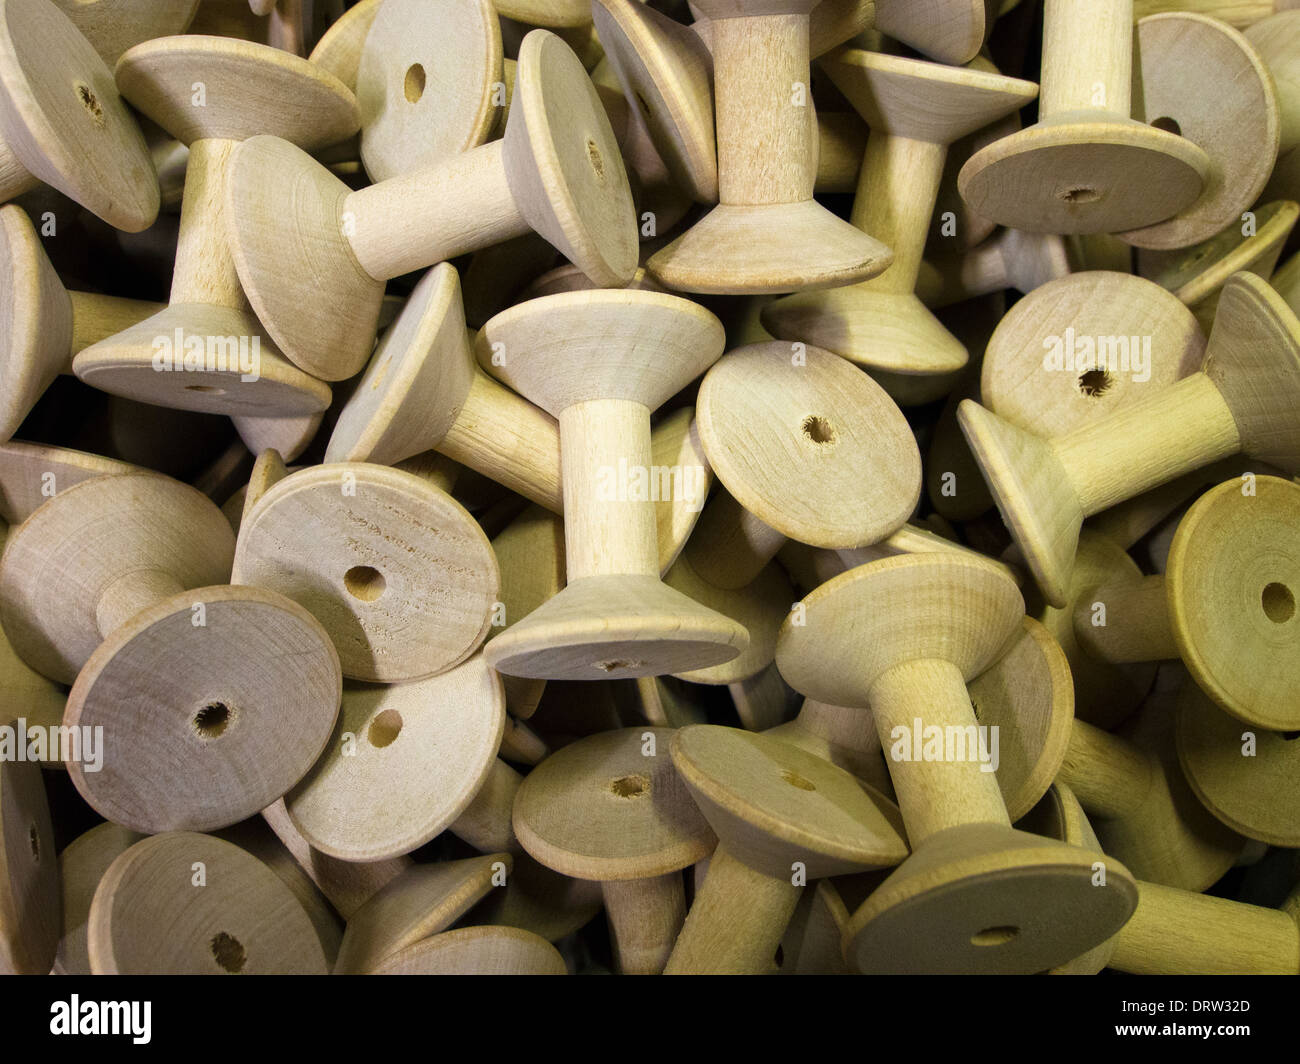 https://c8.alamy.com/comp/DRW32D/a-close-up-of-a-collection-of-empty-bobbins-in-a-derbyshire-textile-DRW32D.jpg